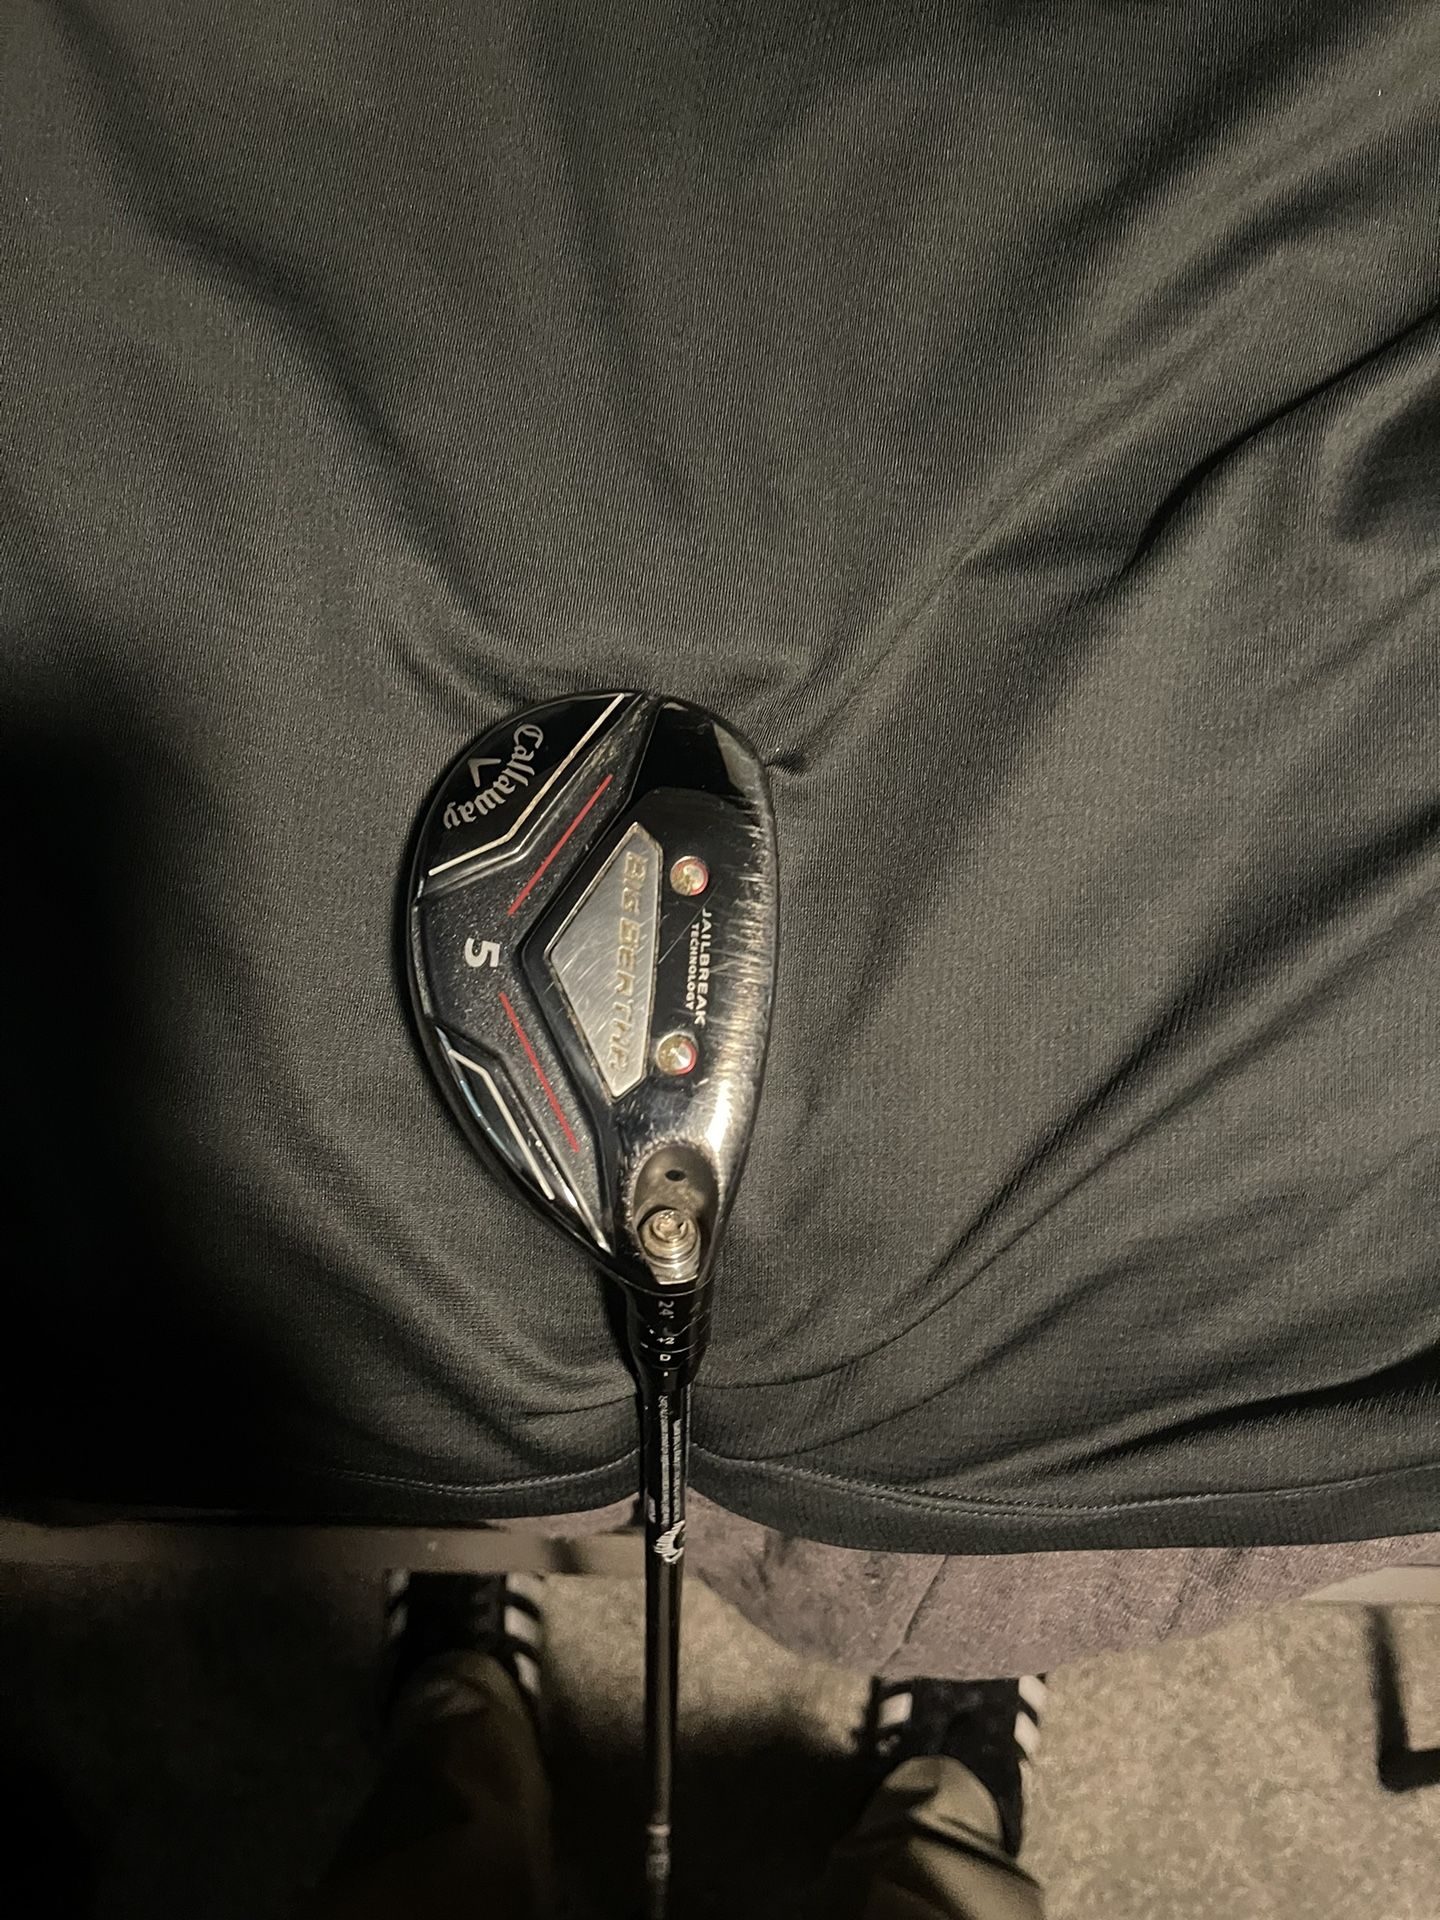 Golf Clubs For Sale